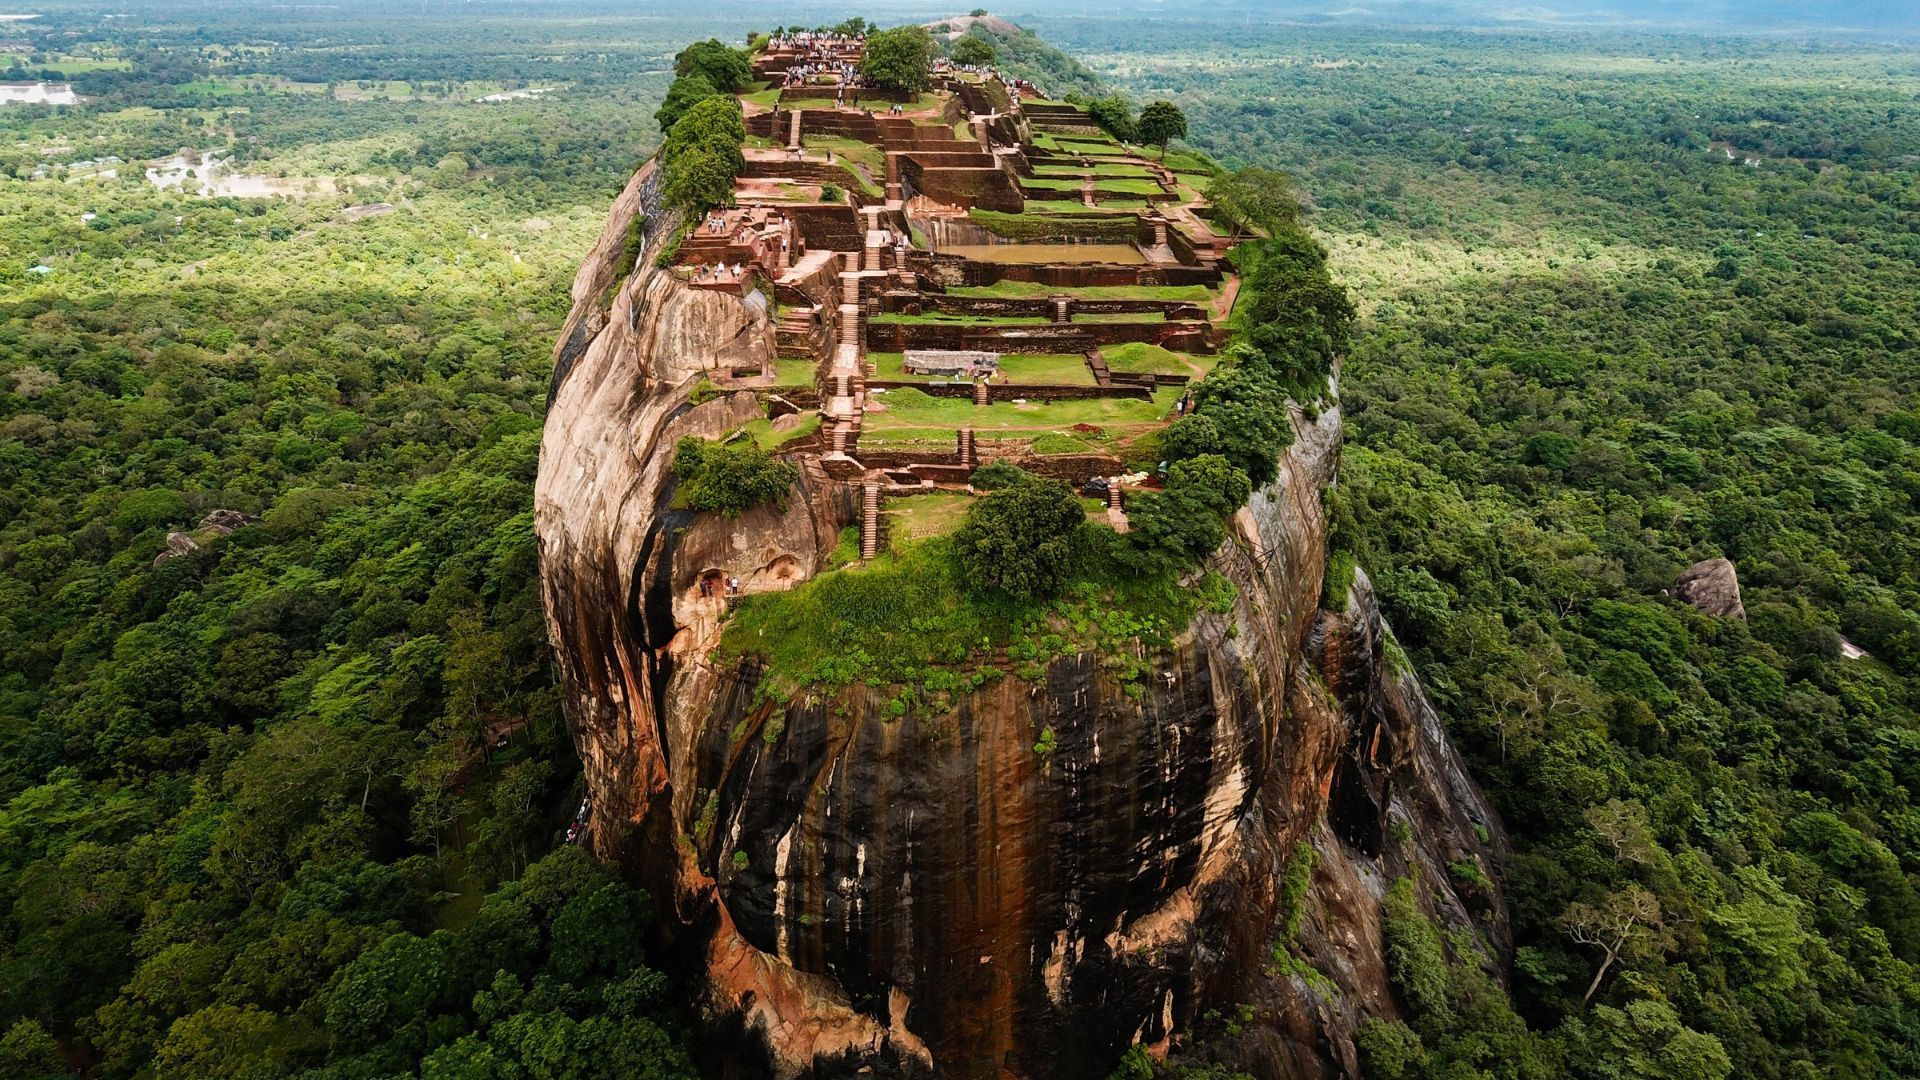 The best places in Sri Lanka according to an expert